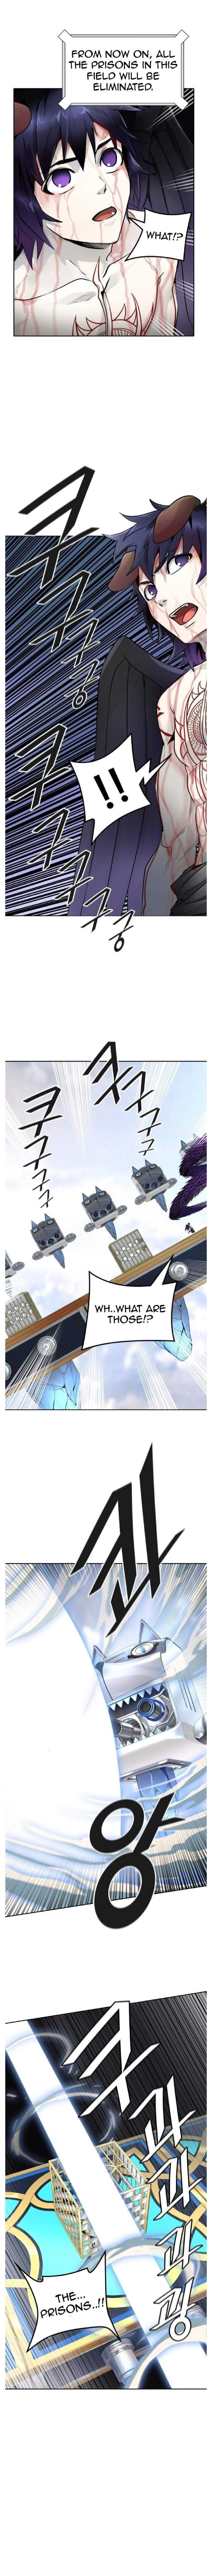 tower of god 503, tower of god 503, Read tower of god 503, tower of god 503 Manga, tower of god 503 english, tower of god 503 raw manga, tower of god 503 online, tower of god 503 high quality, tower of god 503 chapter, tower of god 503 manga scan